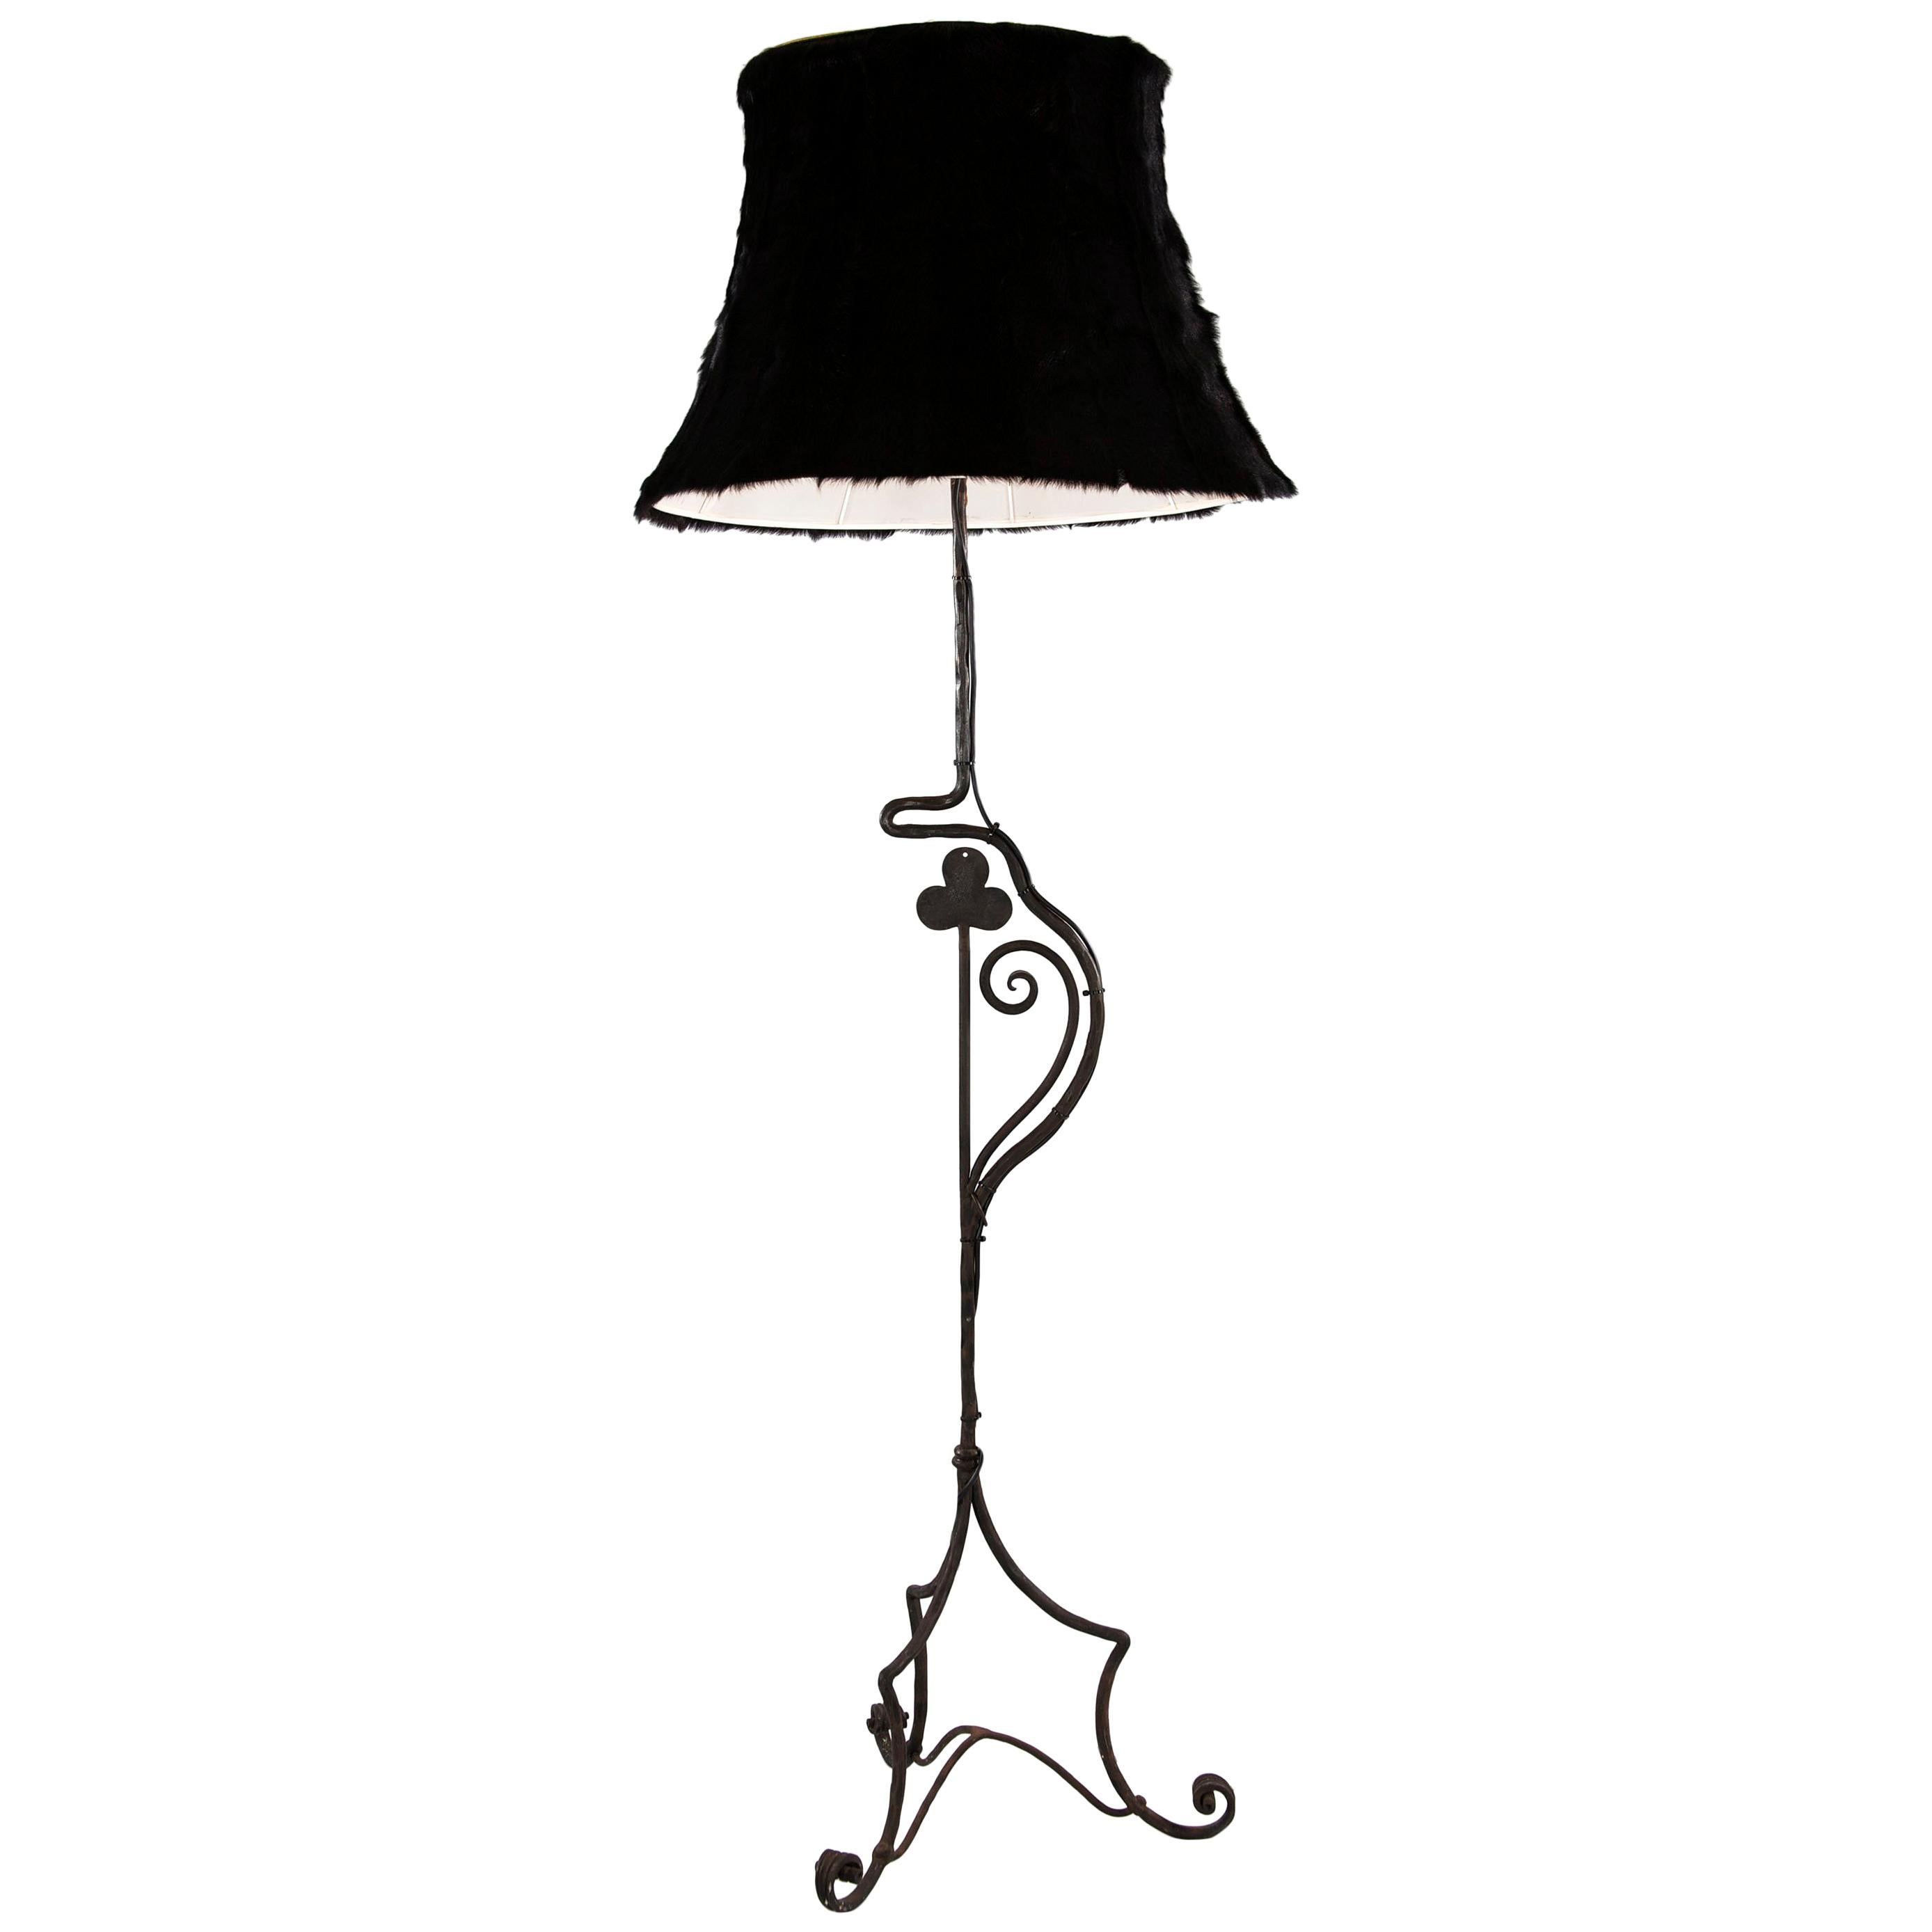 Wrought-Iron Floor Lamp with Black Fur Shade